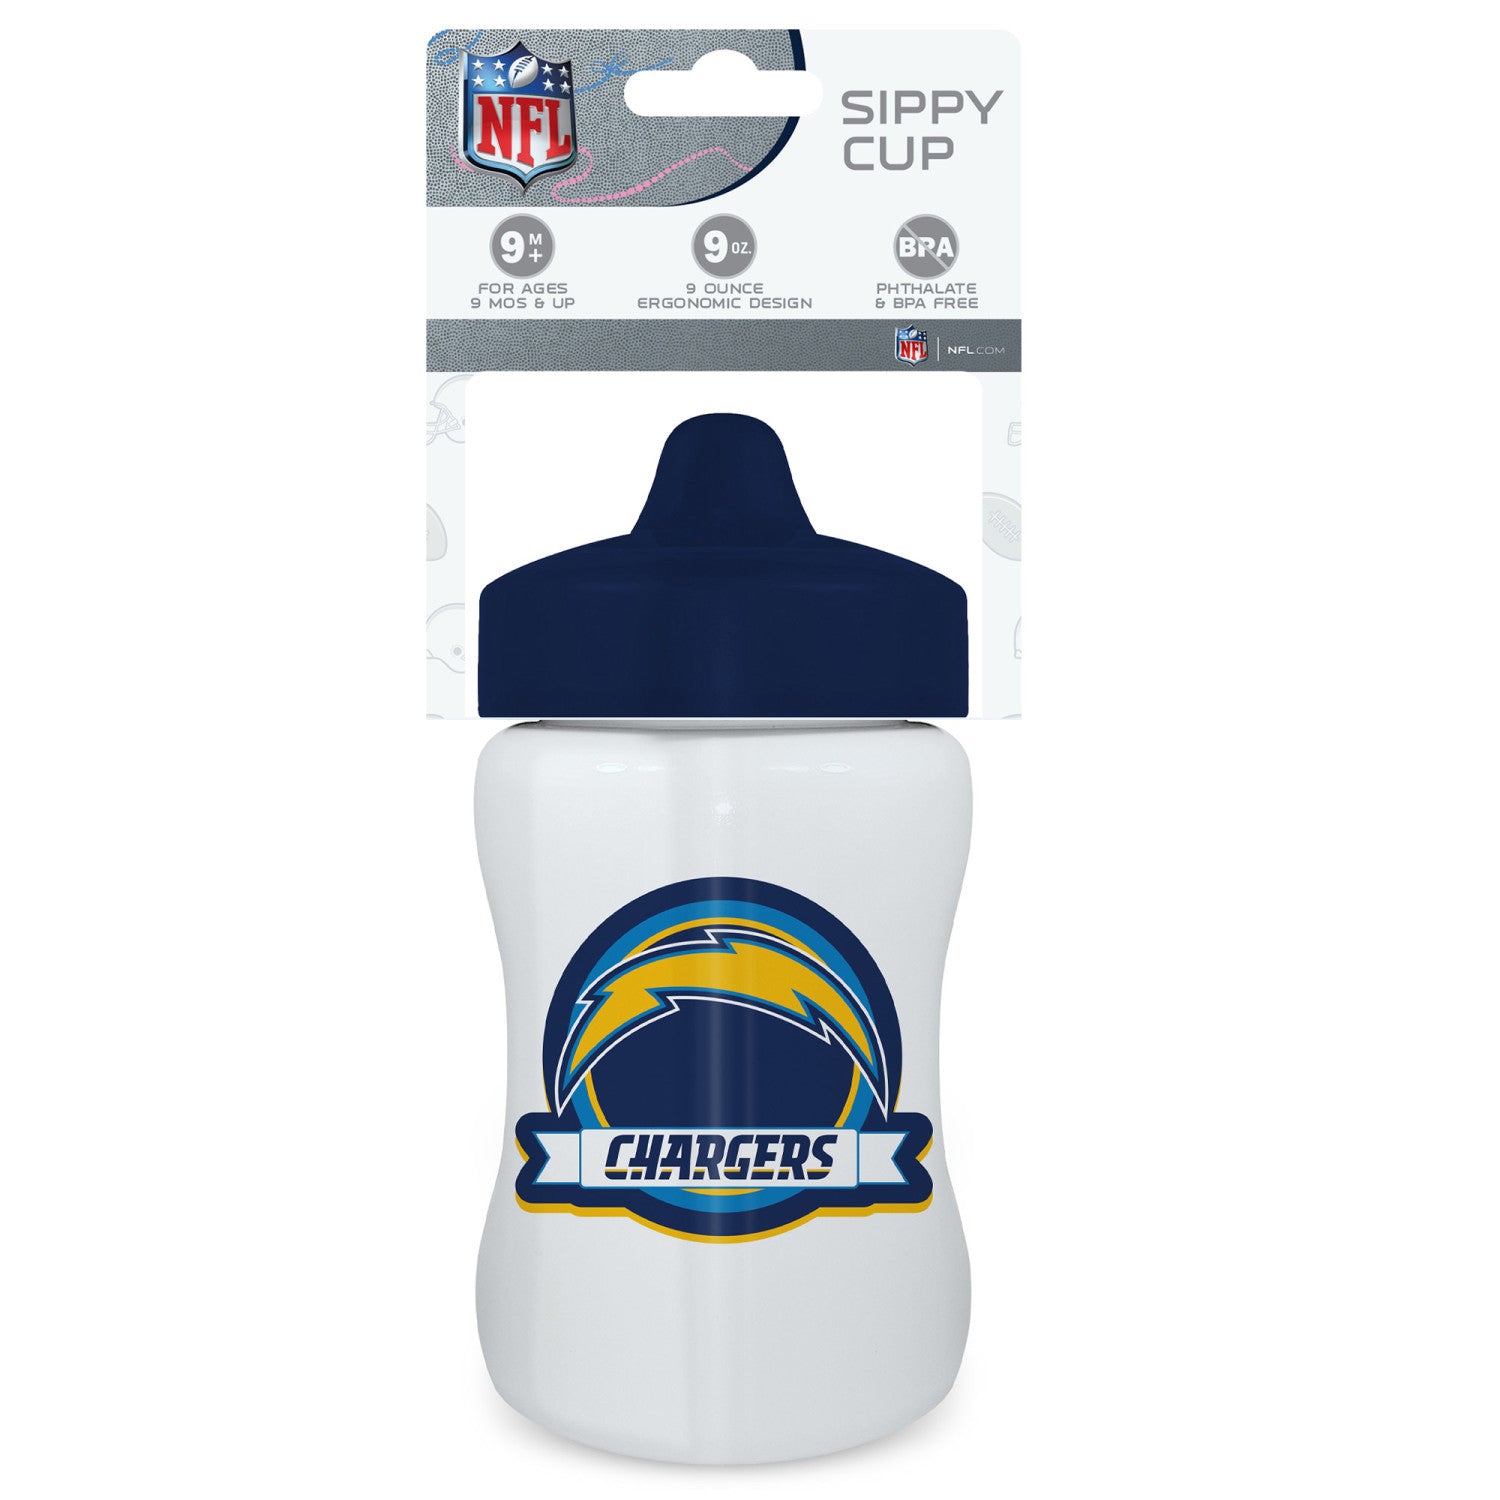 Los Angeles Chargers NFL Sippy Cup